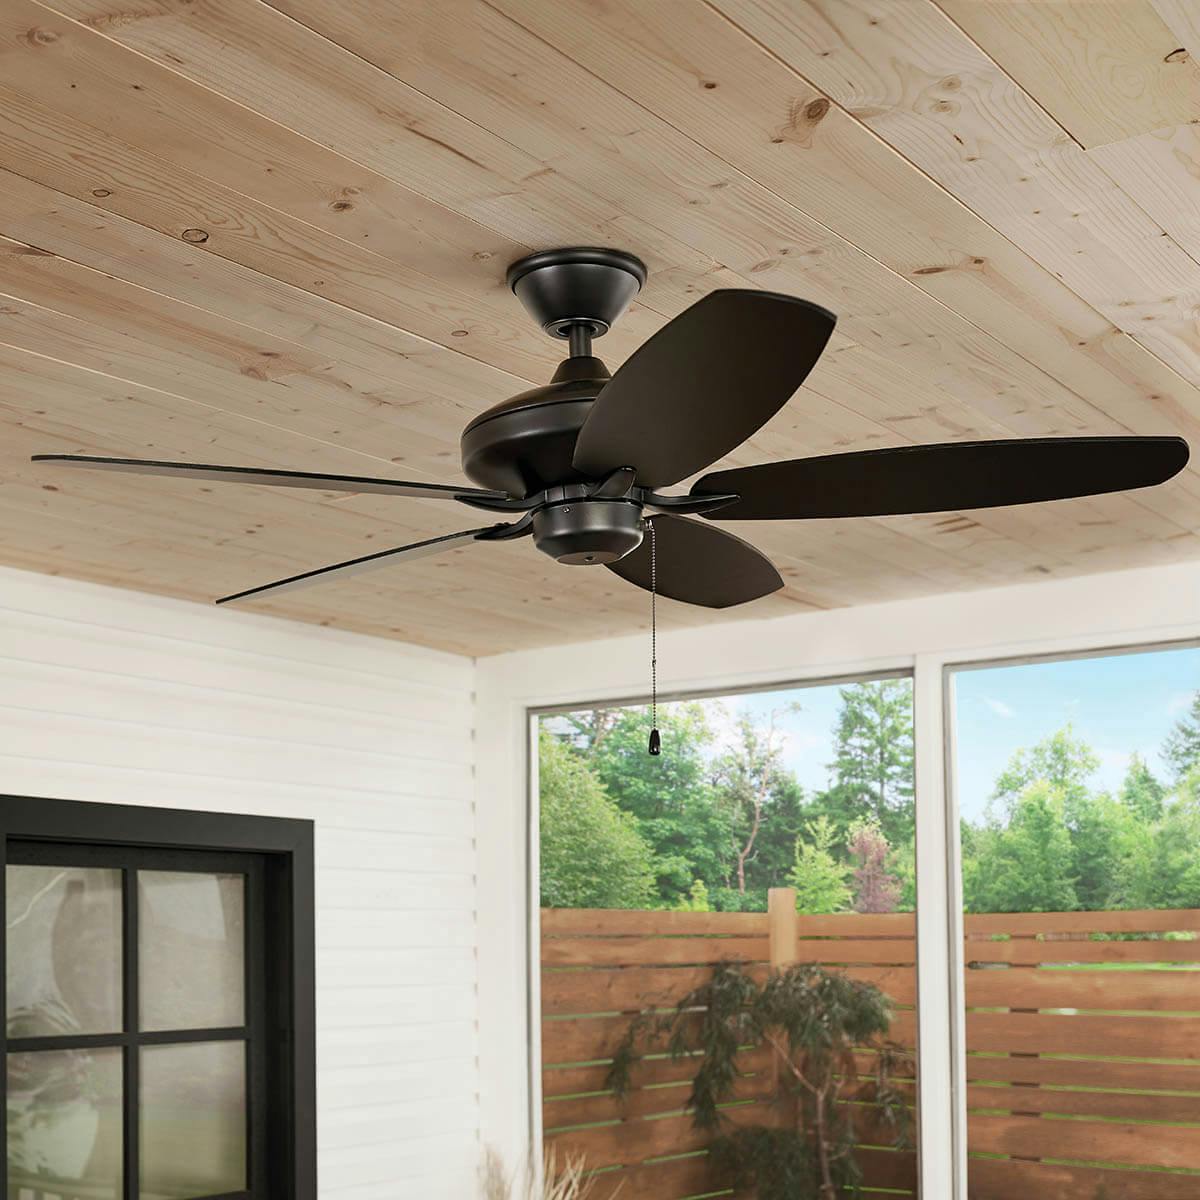 Day time Exterior with 52" Renew Patio Ceiling Fan Satin Black